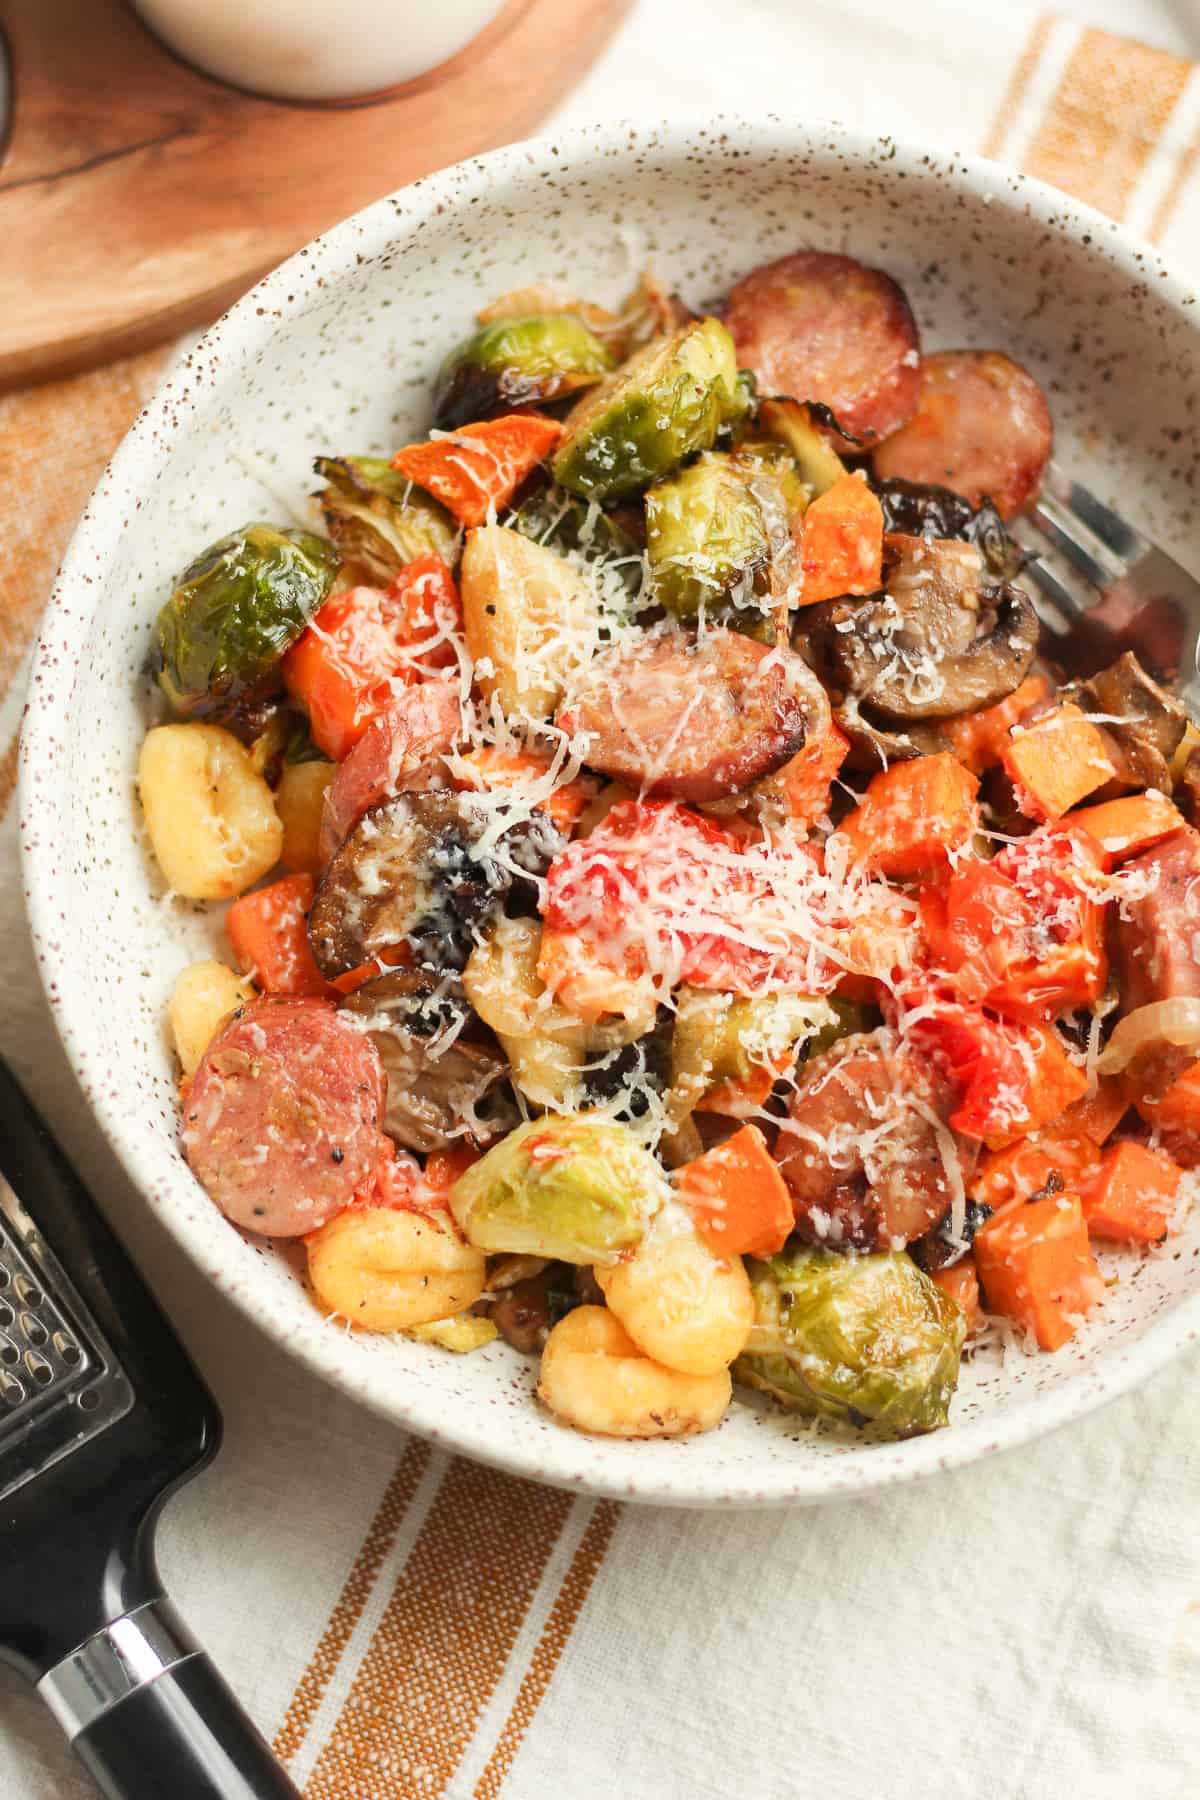 A serving of gnocchi and roasted vegetables with a fork.